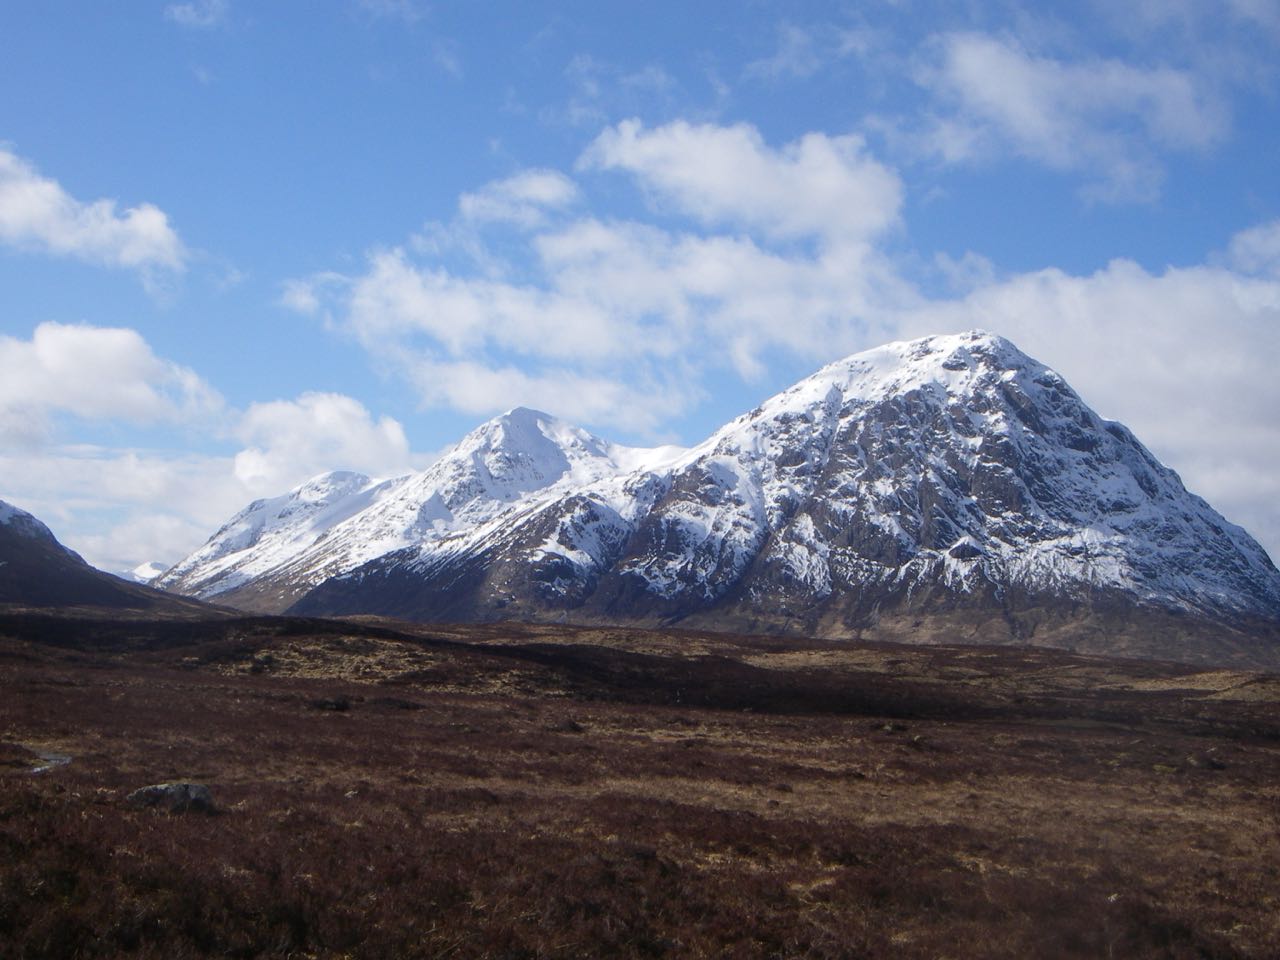 Looking the full length of the Buachaille Etive Mor ridge from Blackrock Cottage.